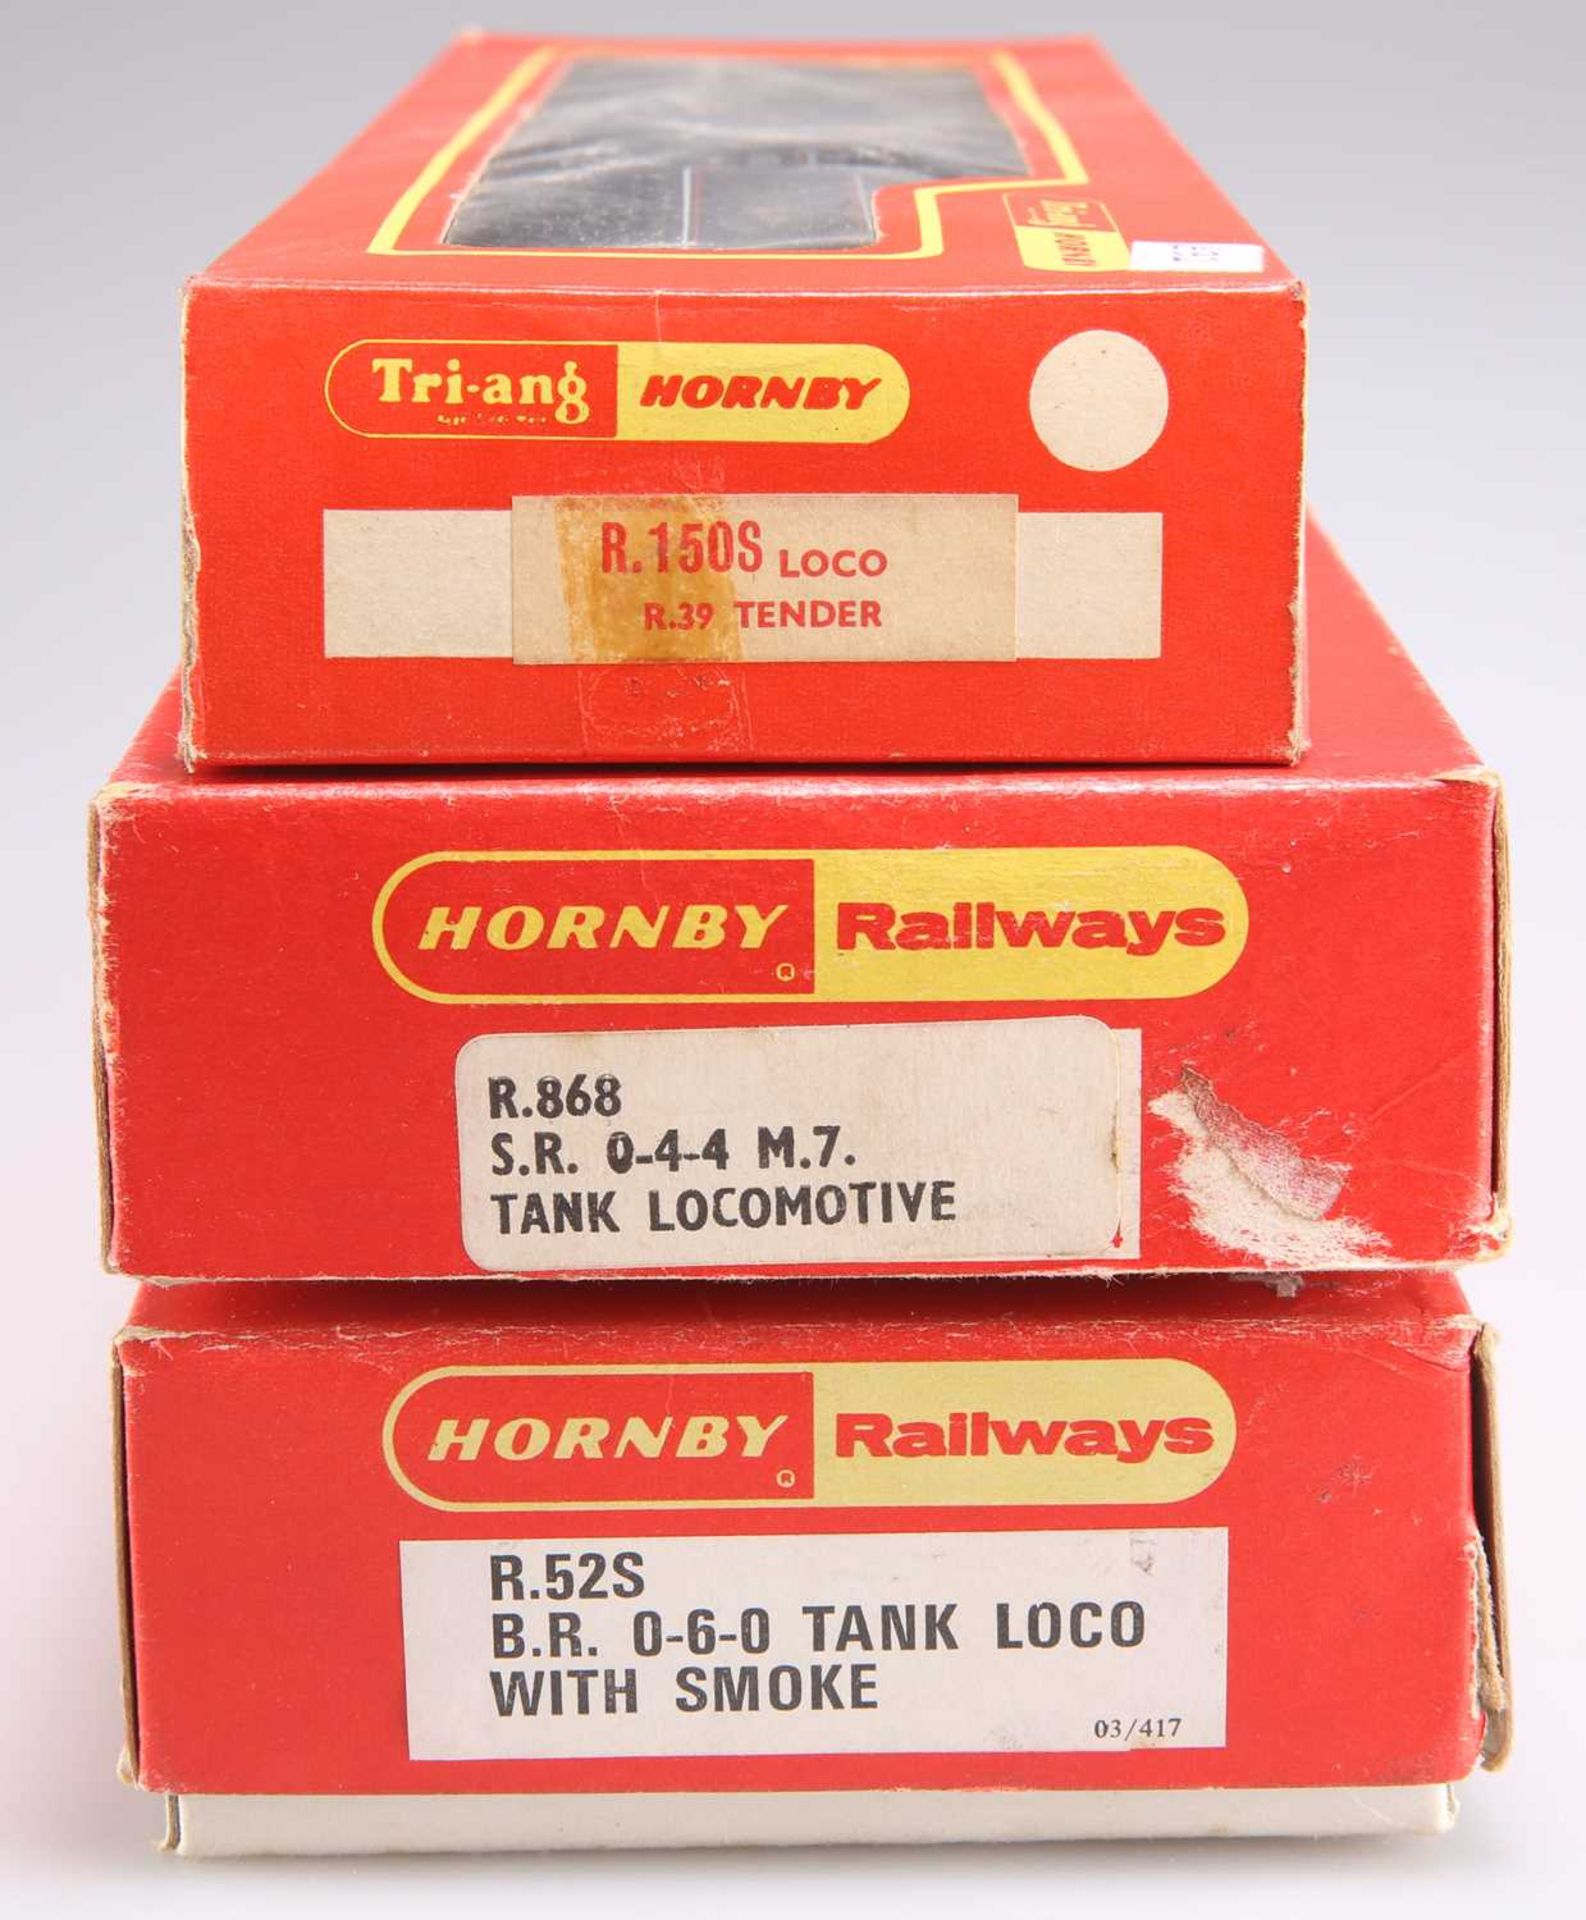 TWO HORNBY OO GAUGE BOXED LOCOMOTIVES AND A TRI-ANG HORNBY BOXED LOCOMOTIVE MODEL - Bild 2 aus 2